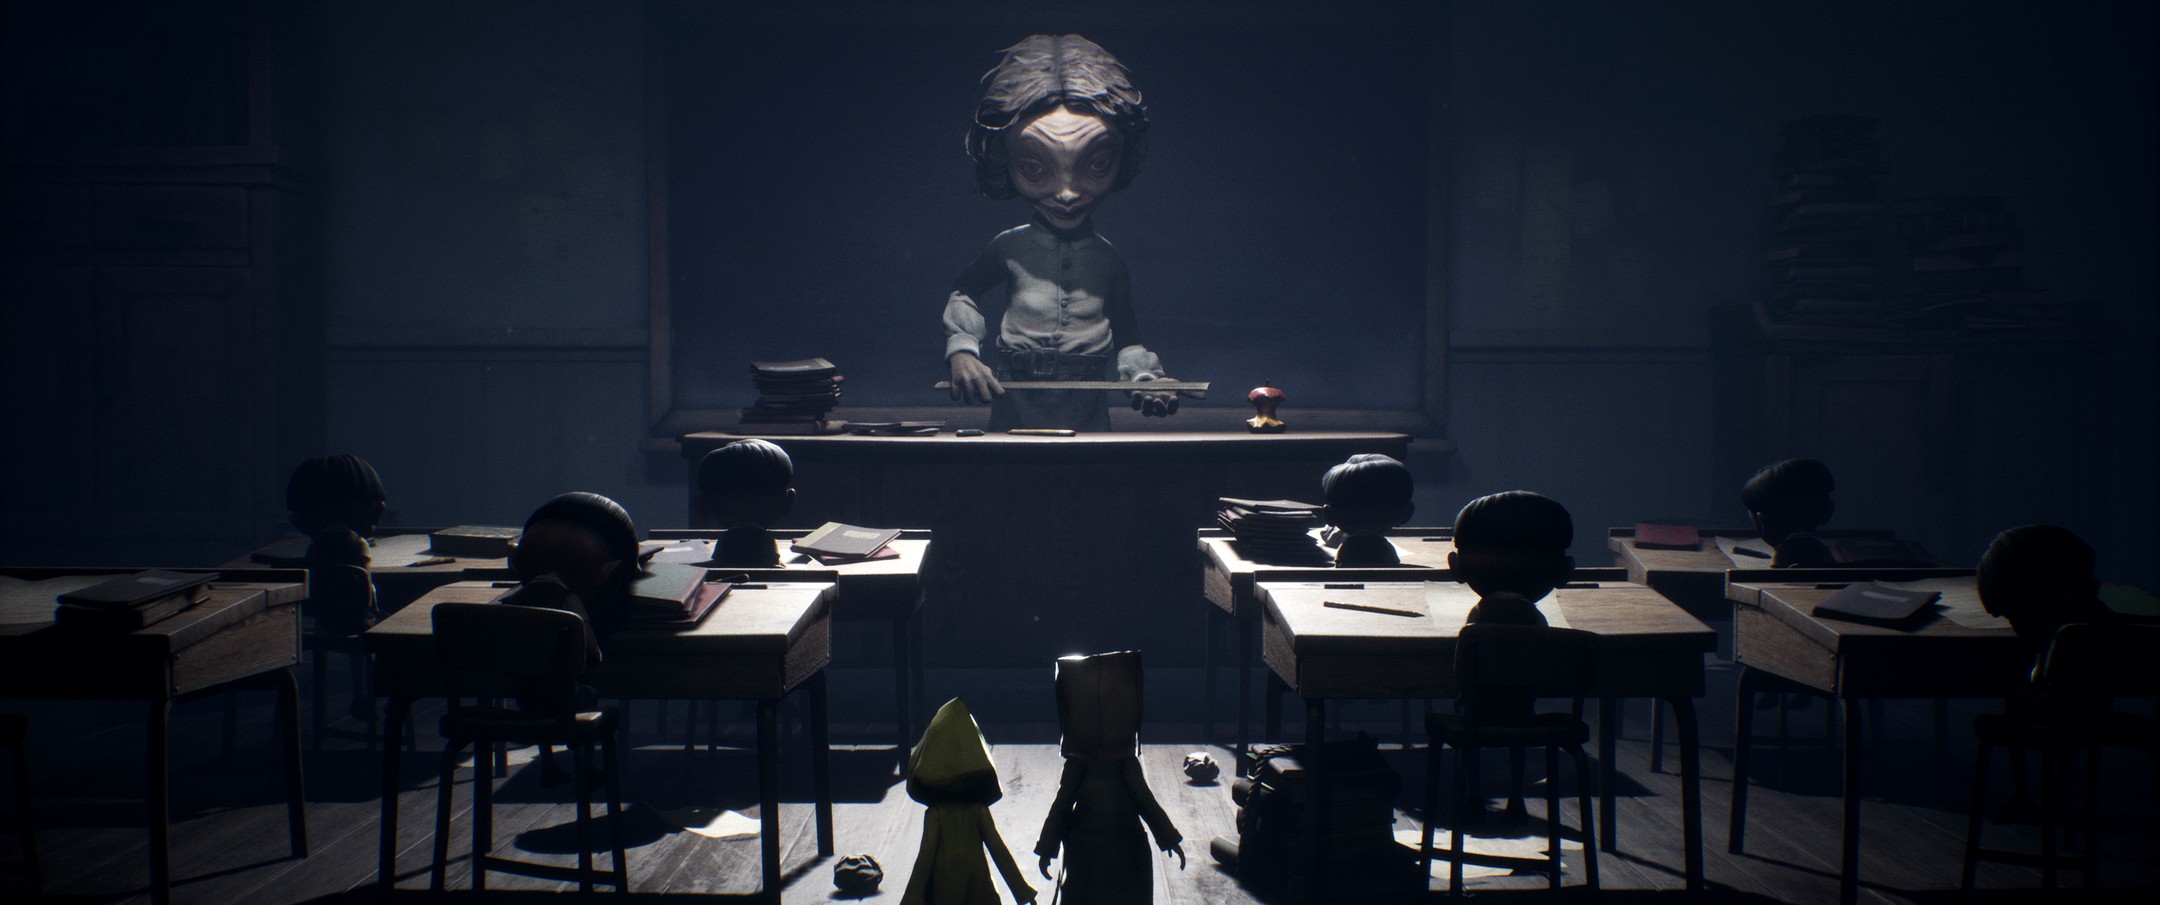 What Is The Meaning Behind Little Nightmares?